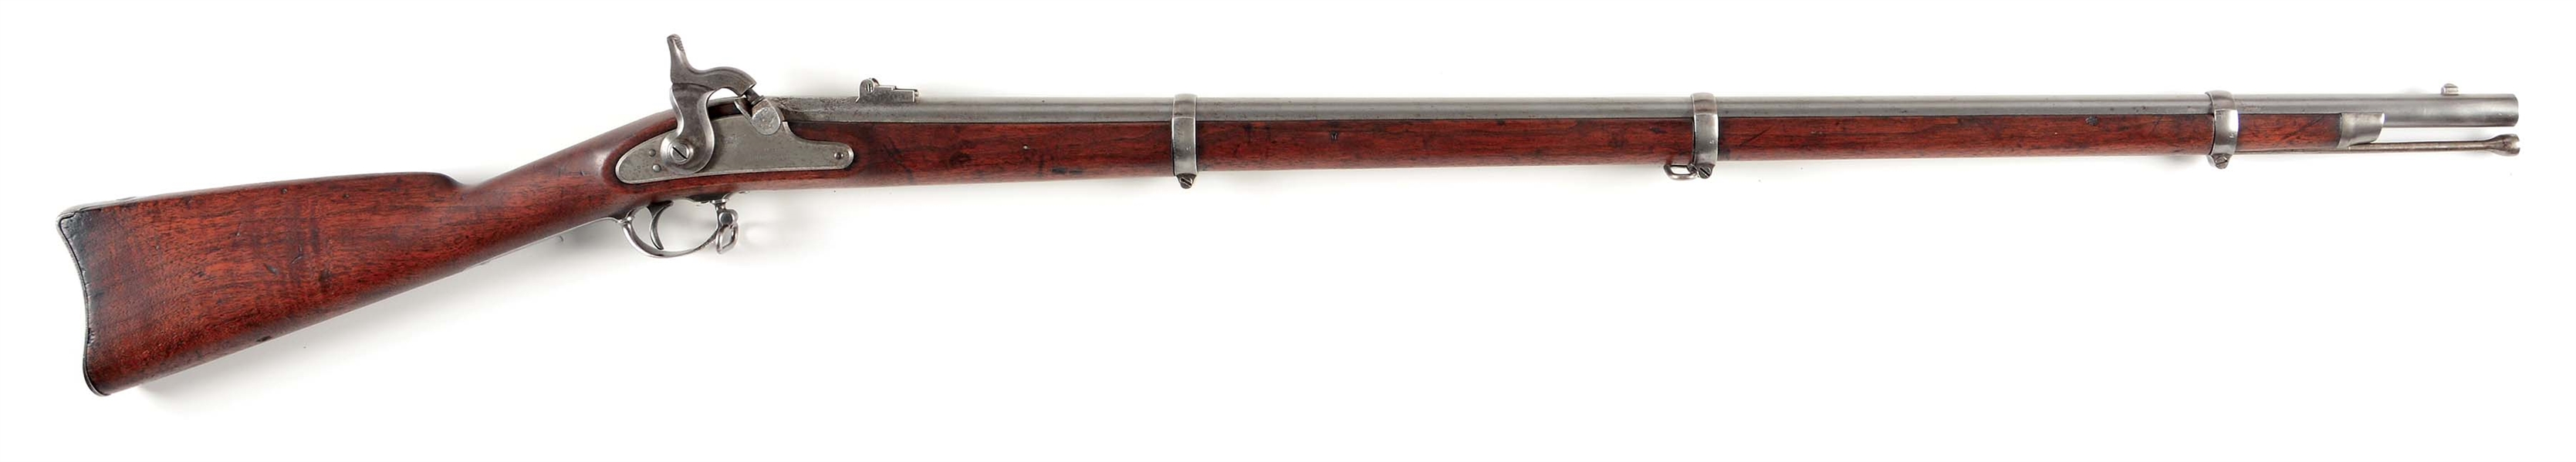 (A) US MODEL 1863 SPRINGFIELD RIFLED MUSKET.